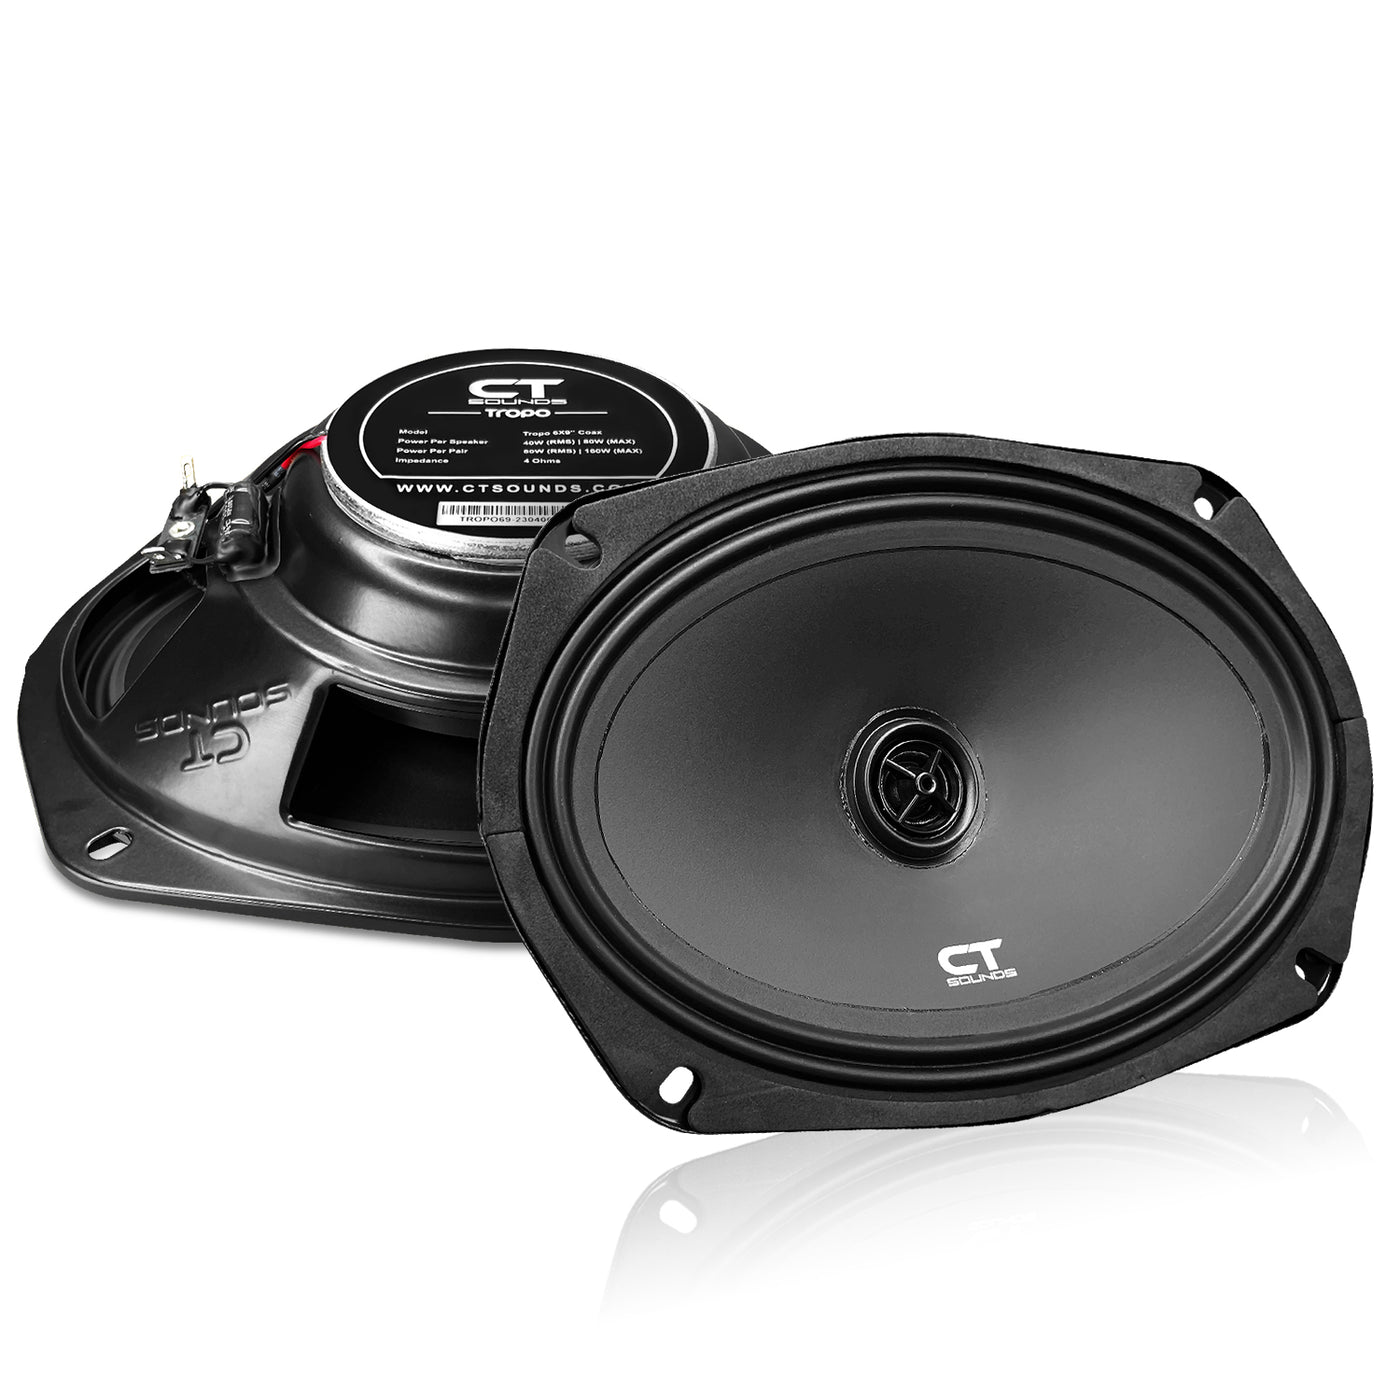 TROPO-6X9-COX // 80 Watts RMS 6x9” Shallow-Mount Car Speakers, Pair